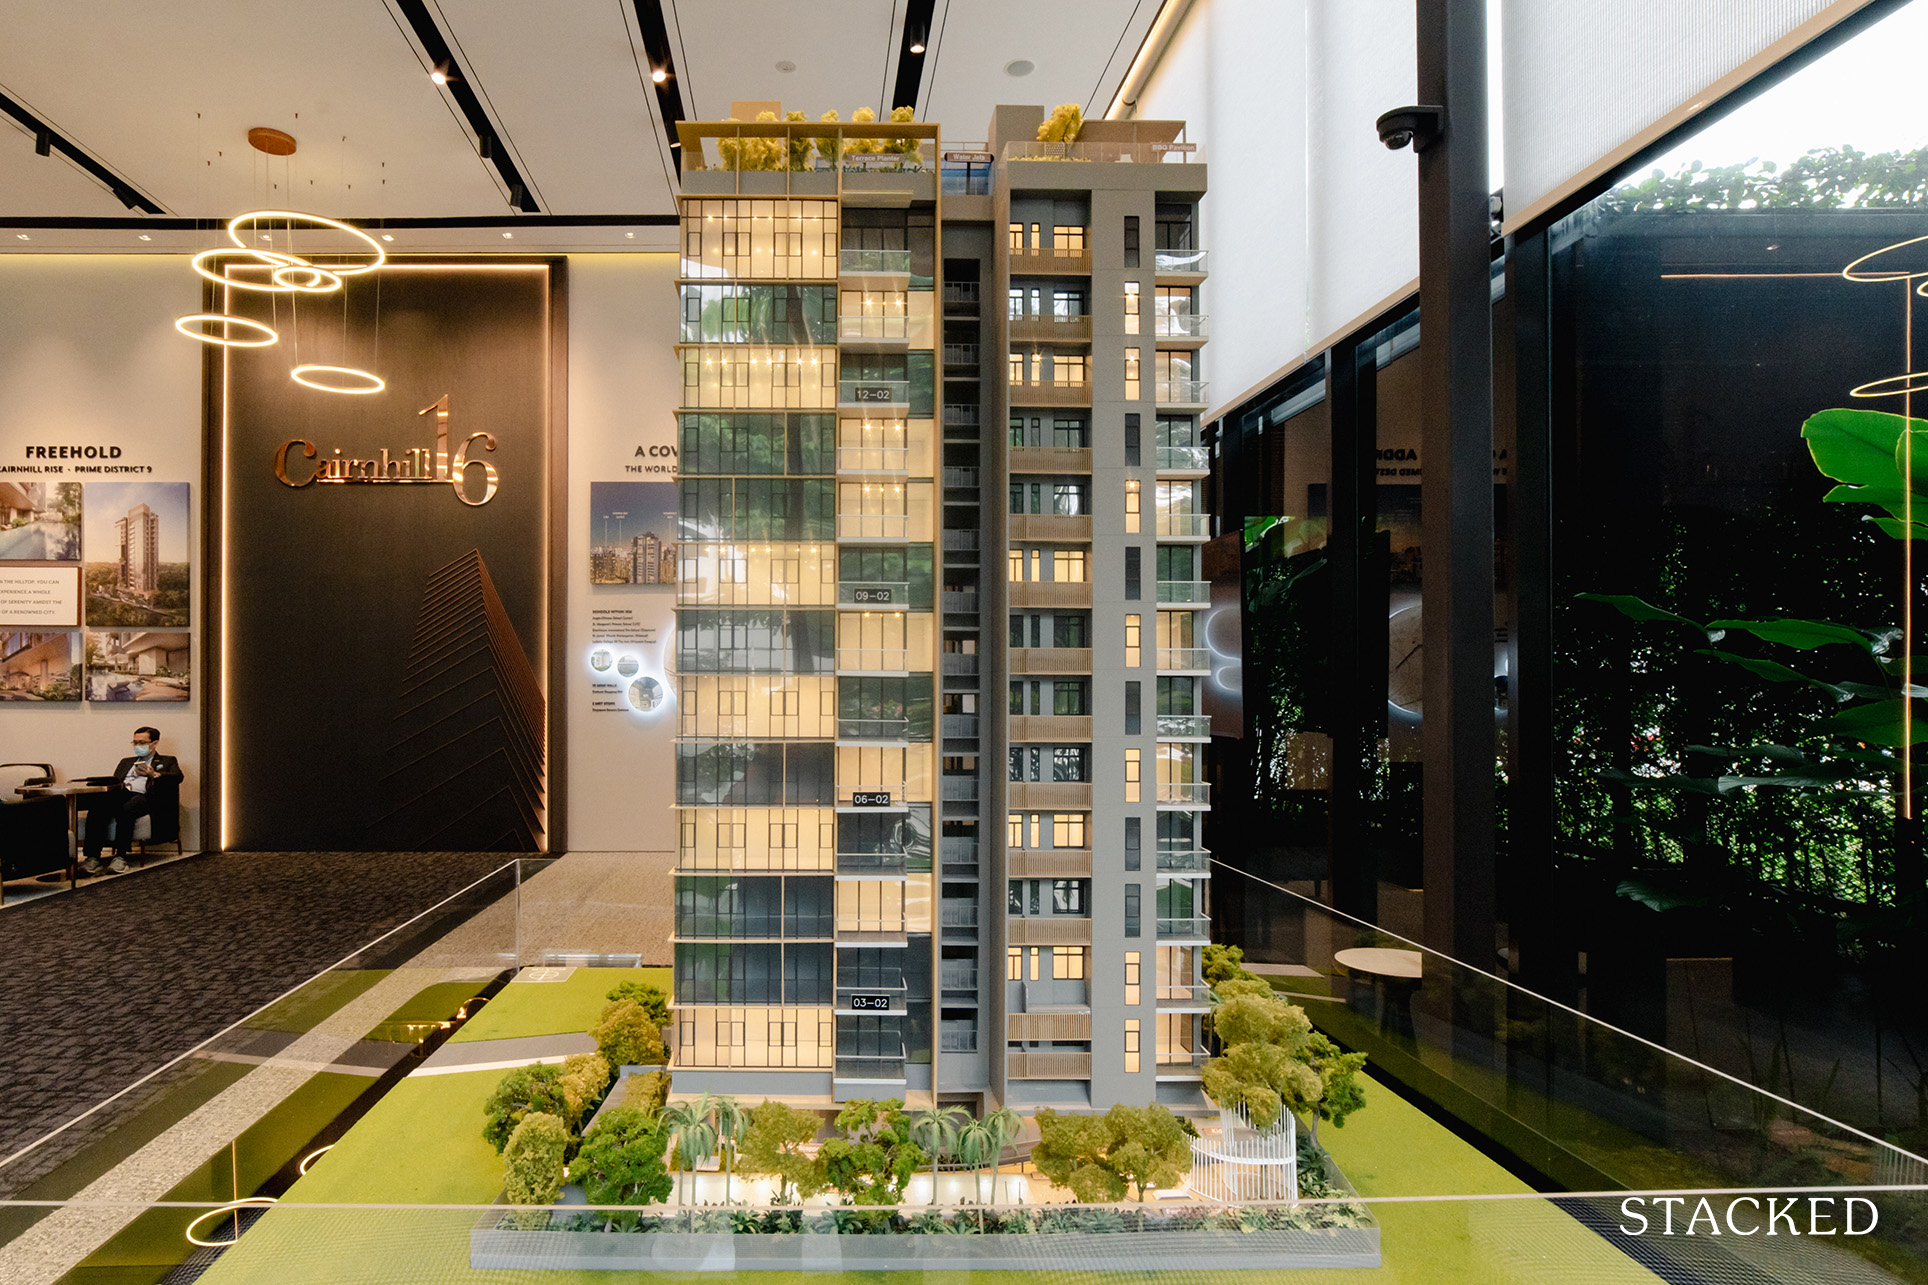 Cairnhill 16 Condo Review: Just 39 Units, Freehold, And With 3.2m High Ceilings